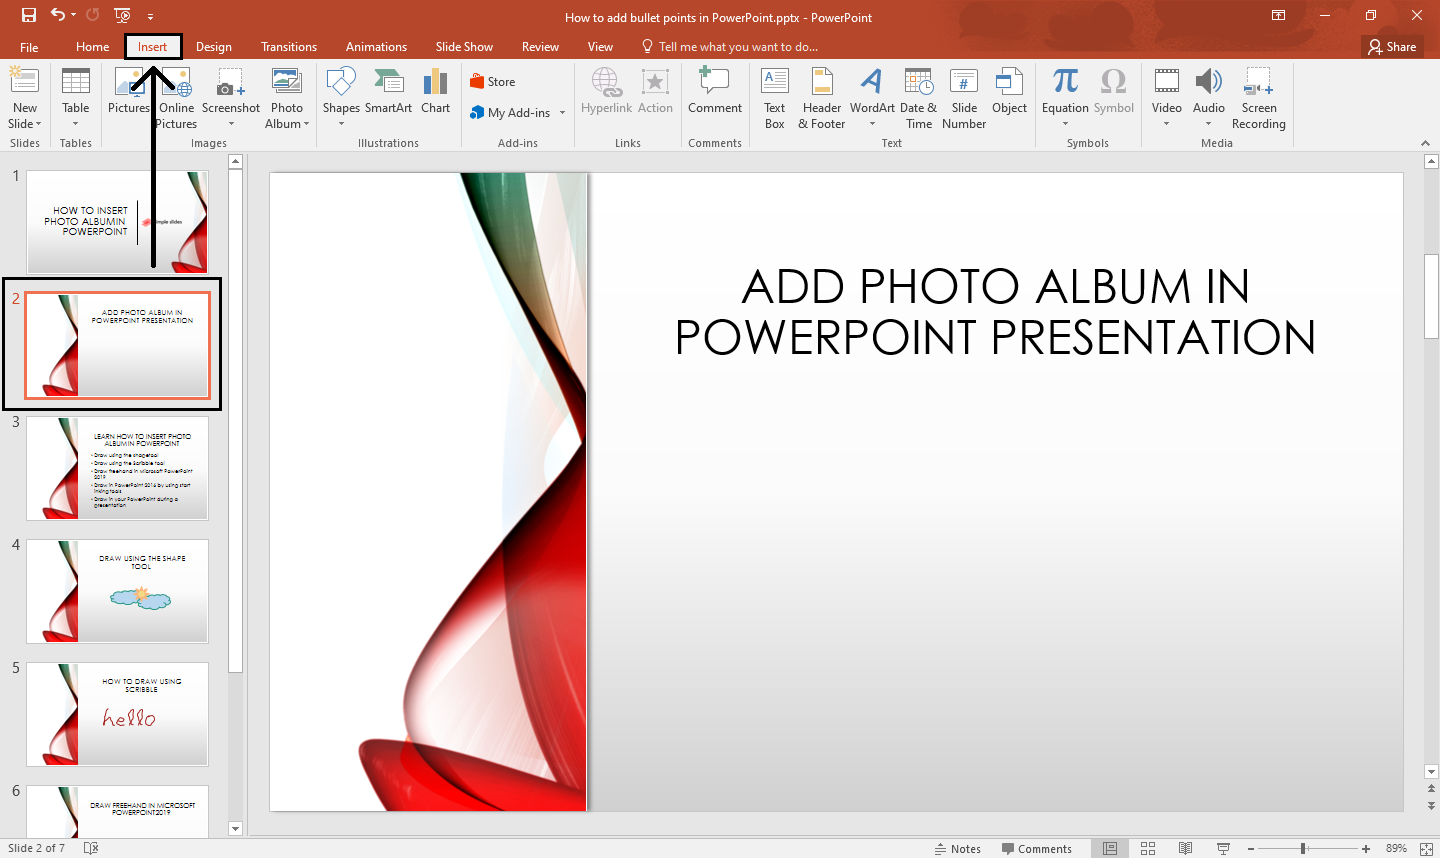 select a specific PowerPoint slide and click "Insert" tab.